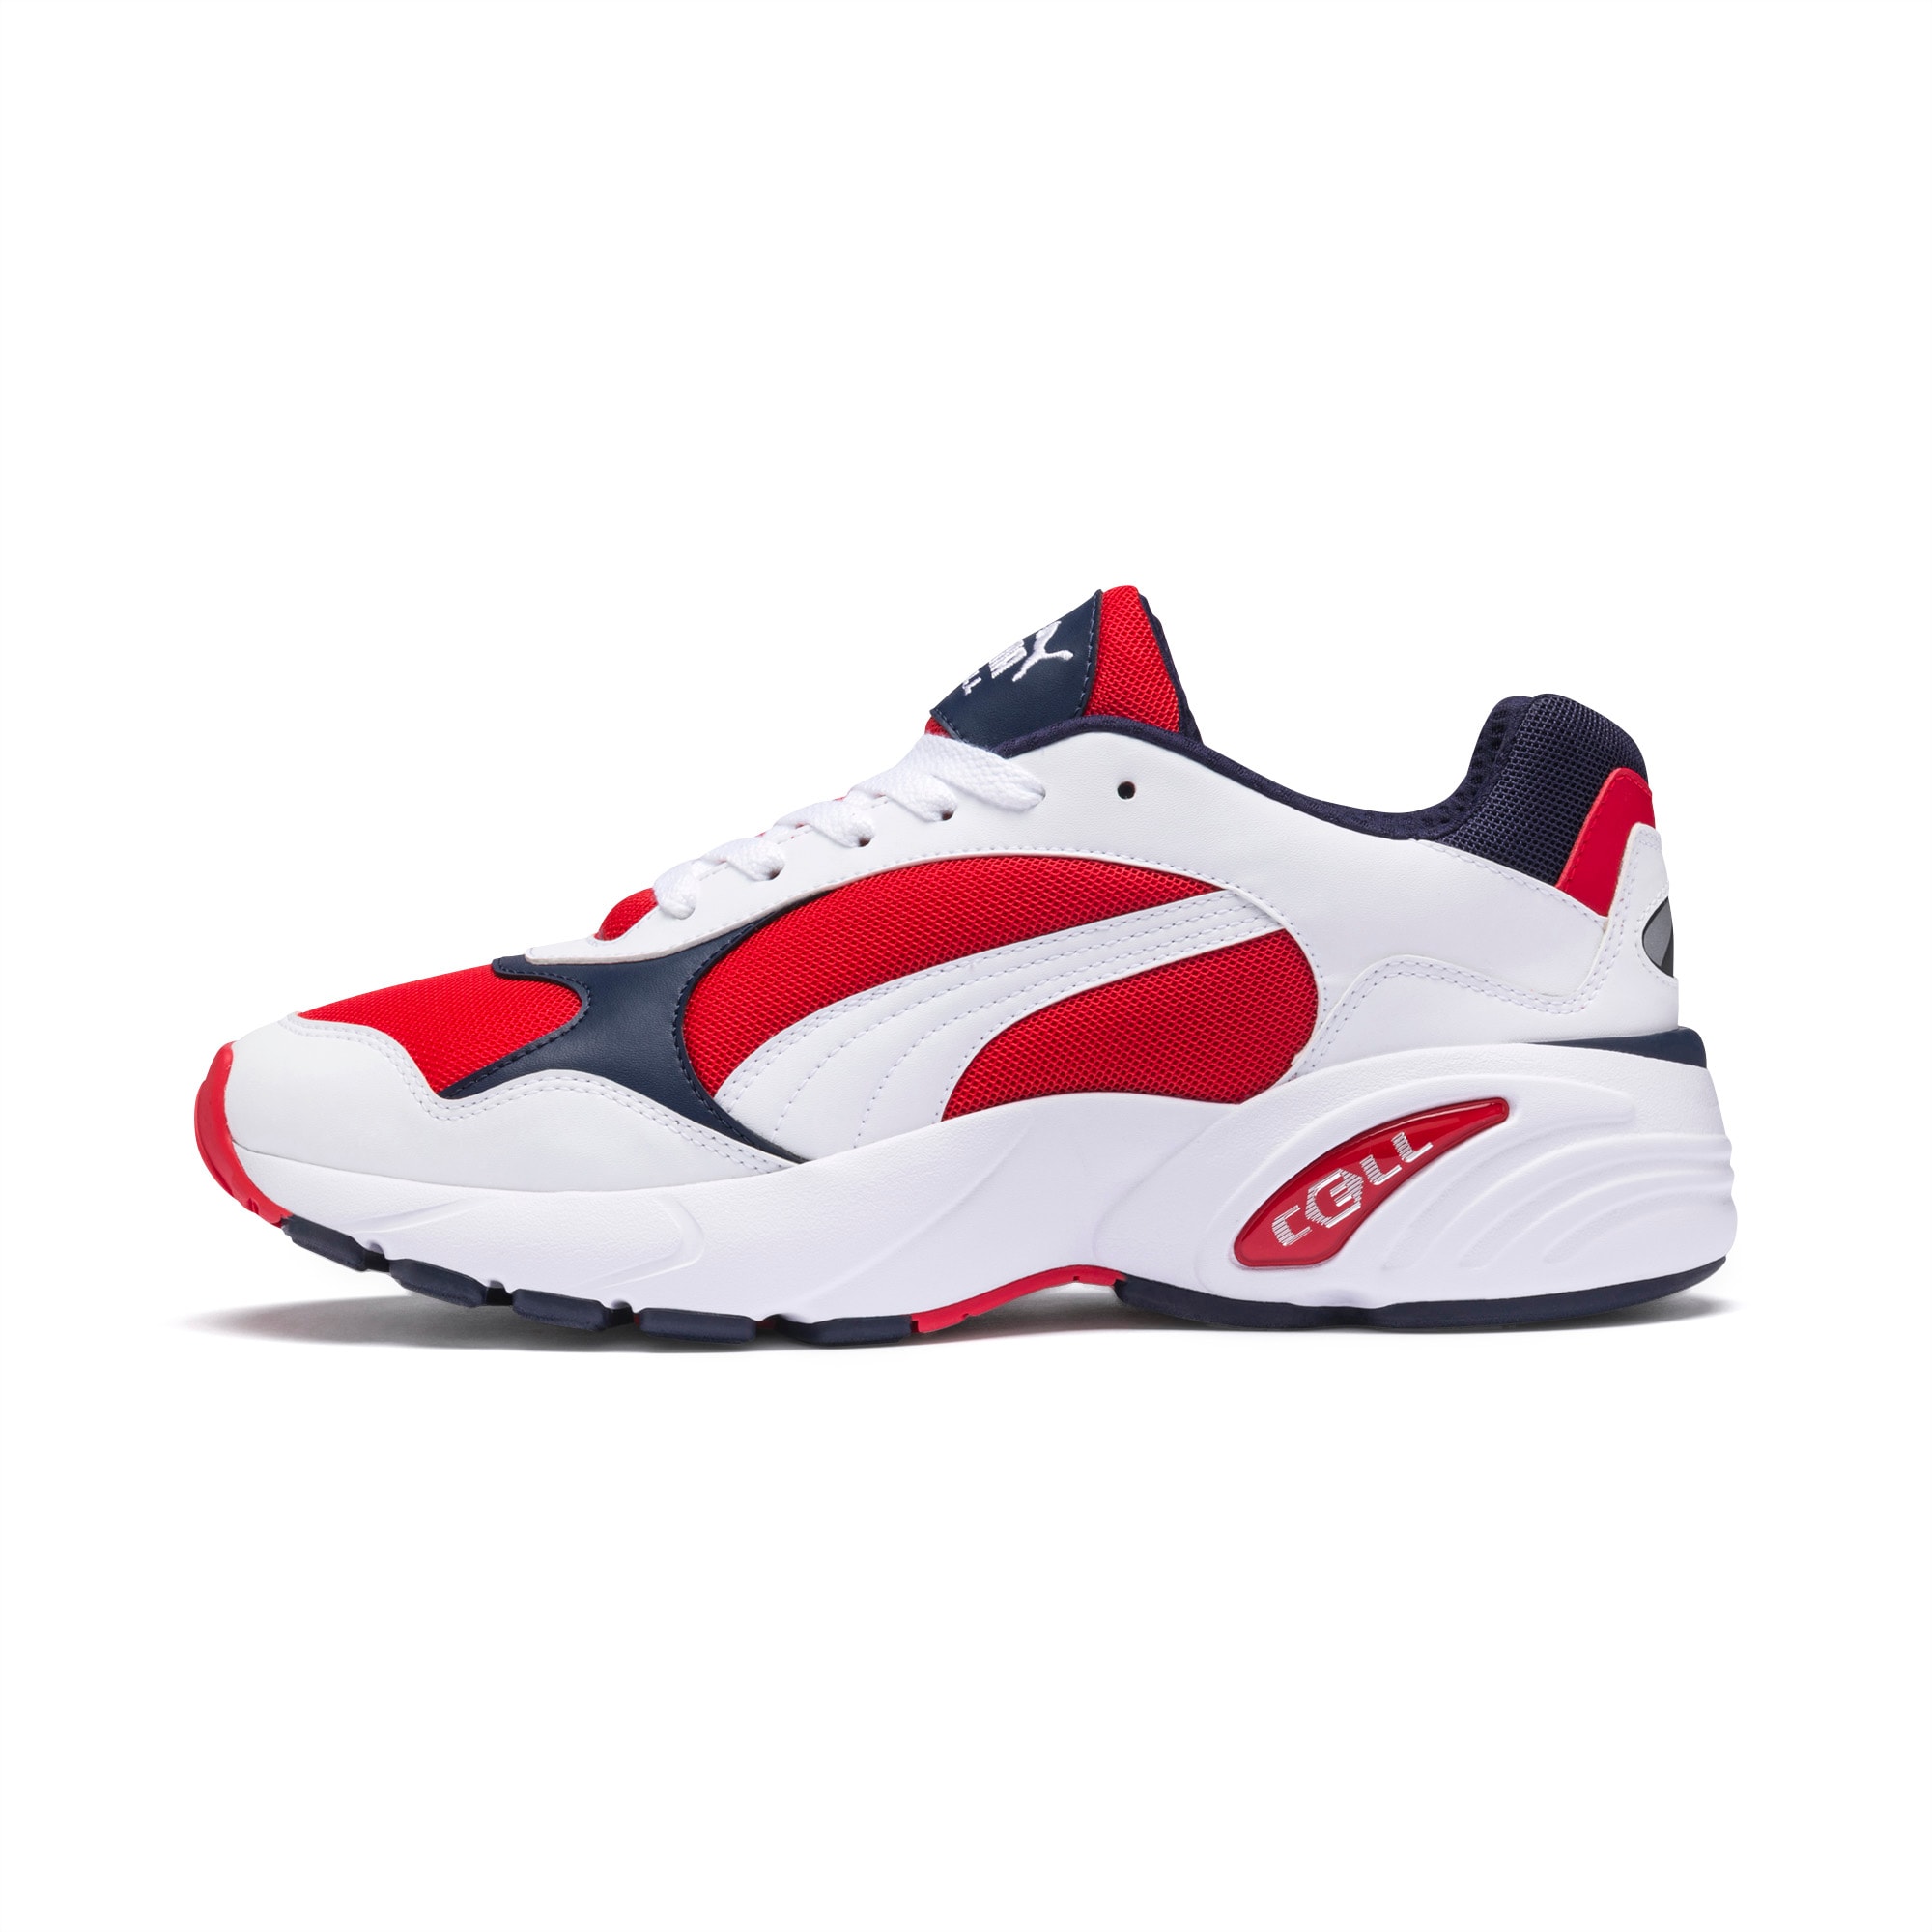 puma sneakers cell